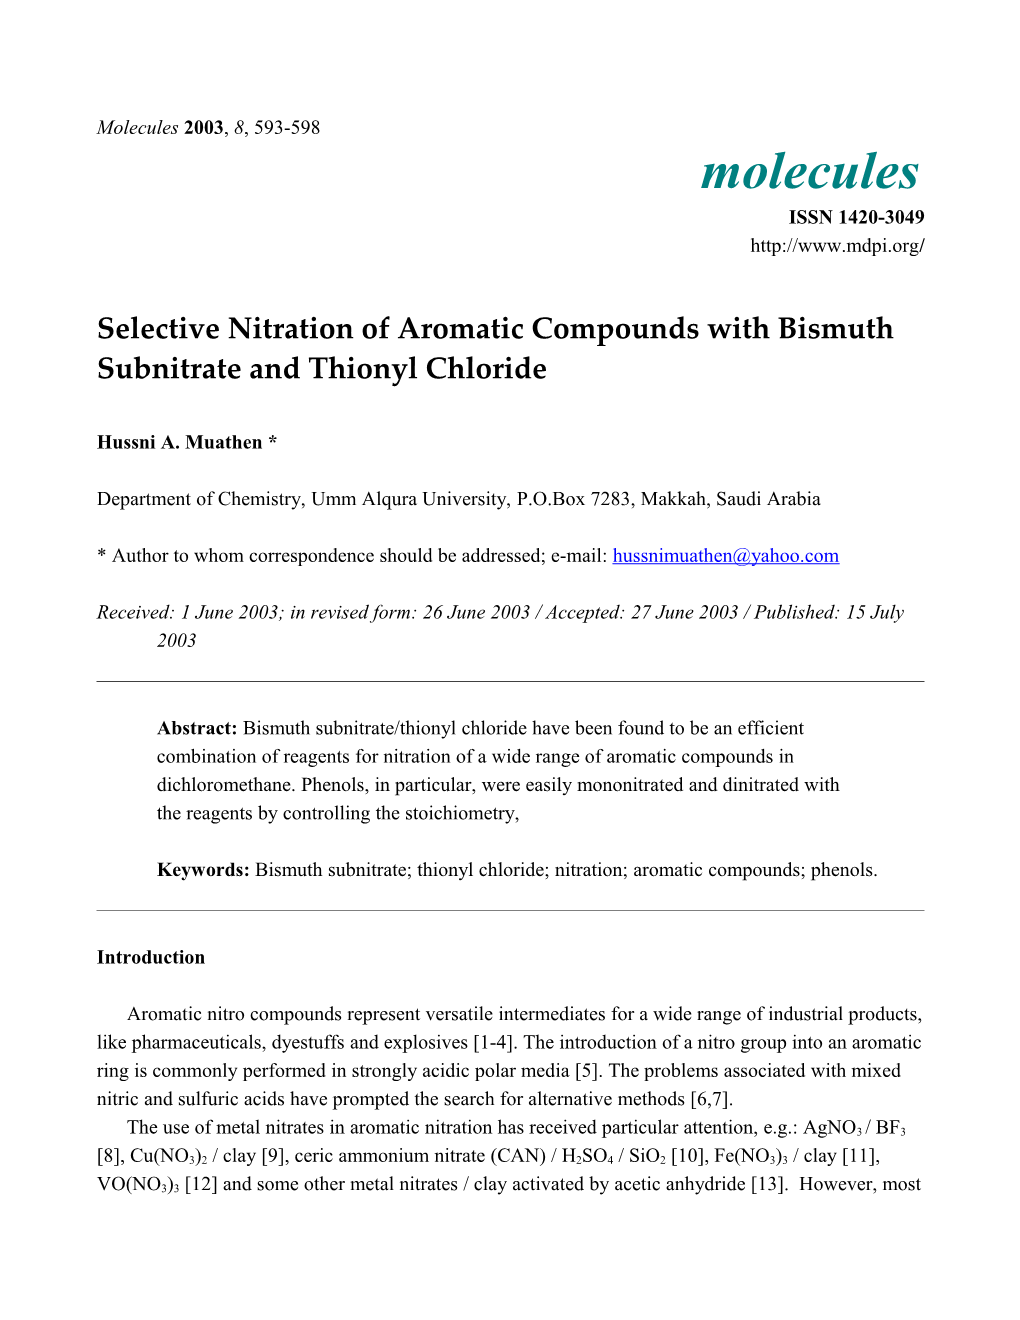 Selective Narration of Aromatic Compounds with Bismuth Subnitrate and Thionyl Chloride